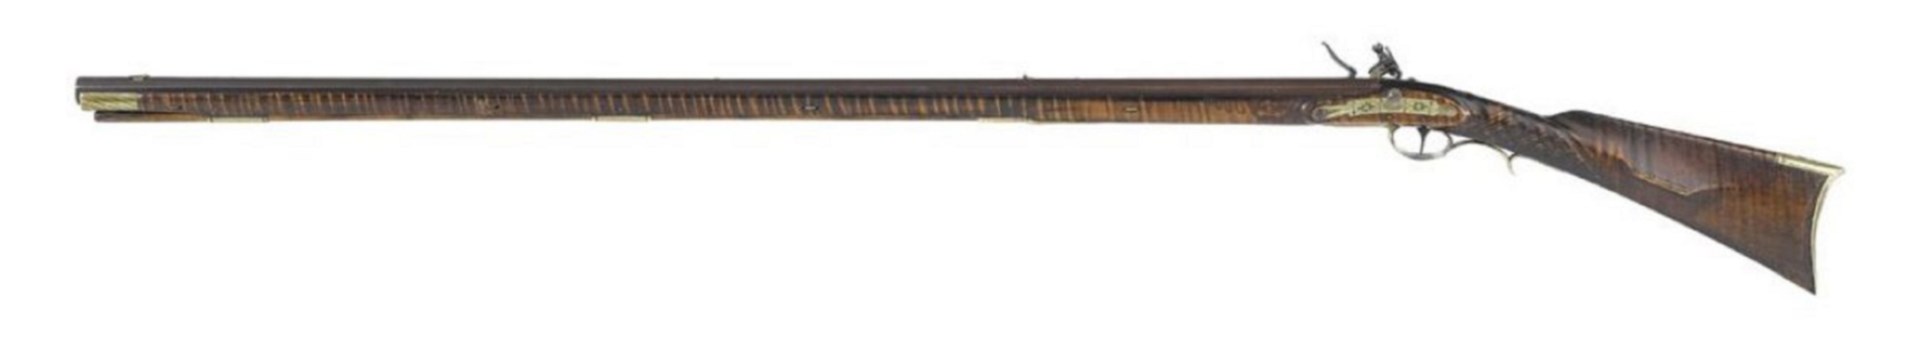 Kentucky Rifle by Melchior Fordney. Fordney’s work in the early 19th century fell under the Golden Age of Pennsylvania long rifles and his weapons were as intricately beautiful as they were useful. Lancaster School, Reconversion to Flintlock, c. 1835-40. "Melchoir Fordney was one of the finest, although not one of the earliest, Lancaster gunsmiths and a very good engraver; he executed very nice details. In an odd set of circumstances, he was murdered with an ax by a lunatic in October 1846. “Courtesy of Pook & Pook